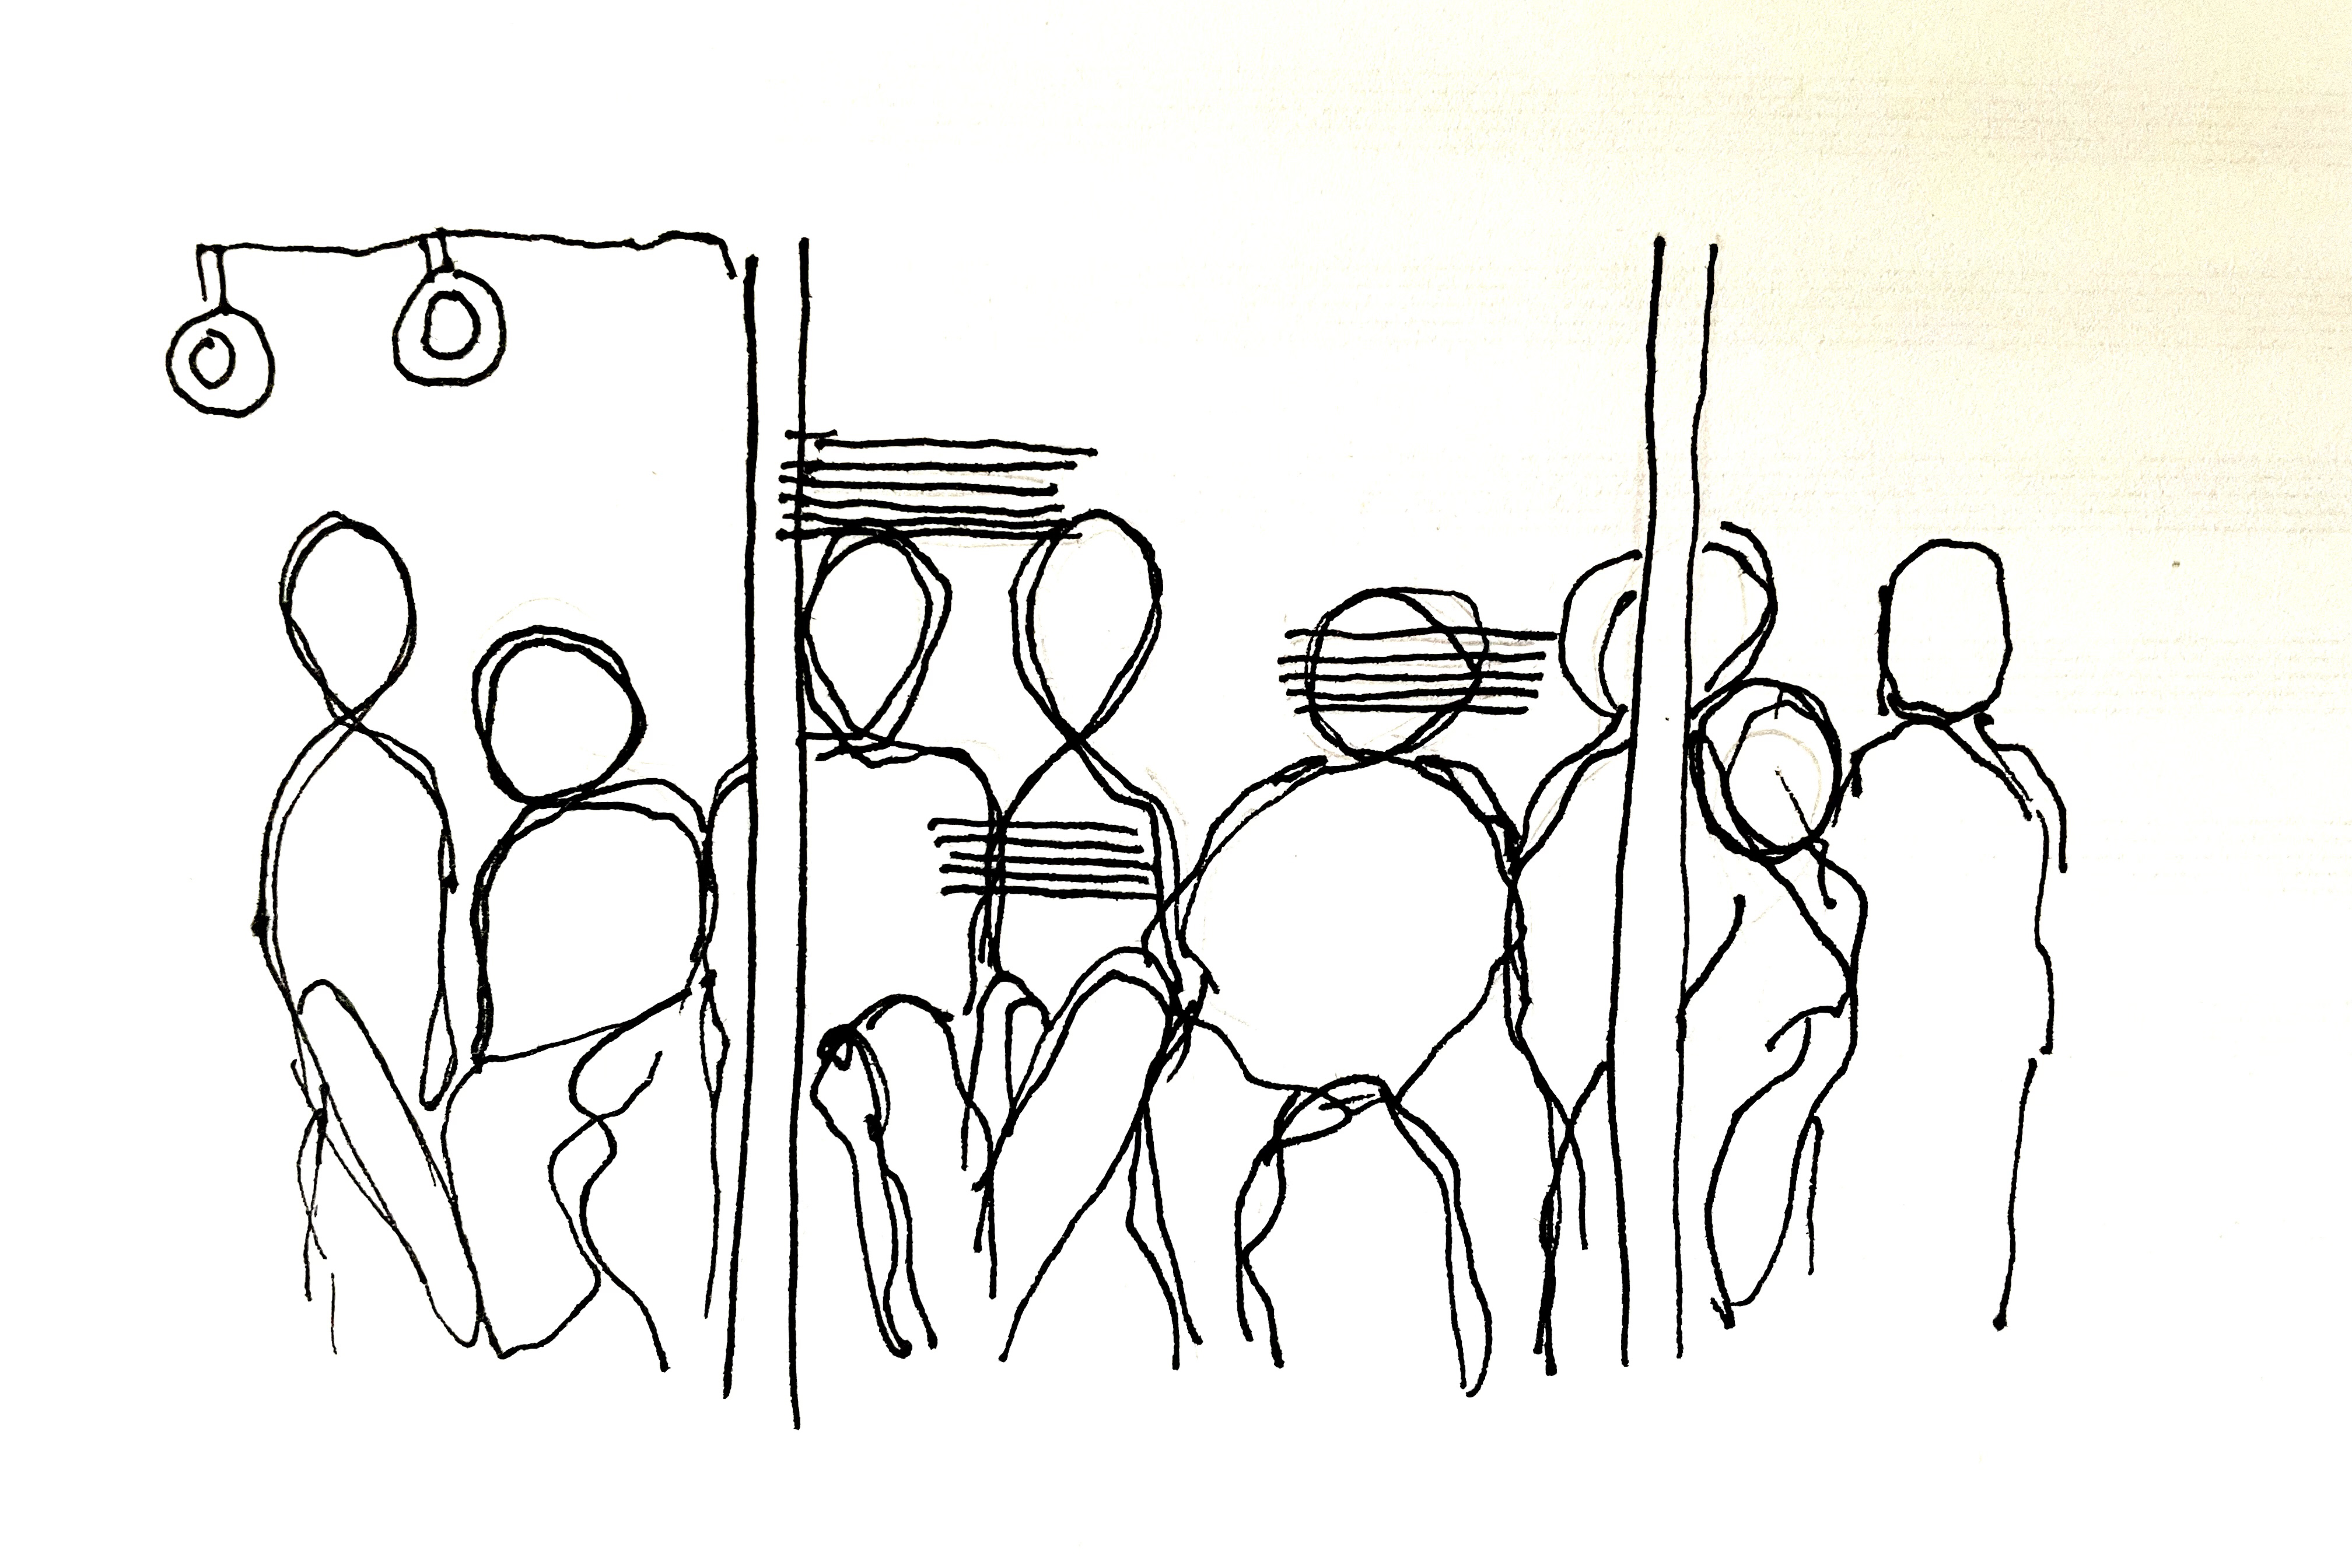 A line drawing of several people against a plain white background 